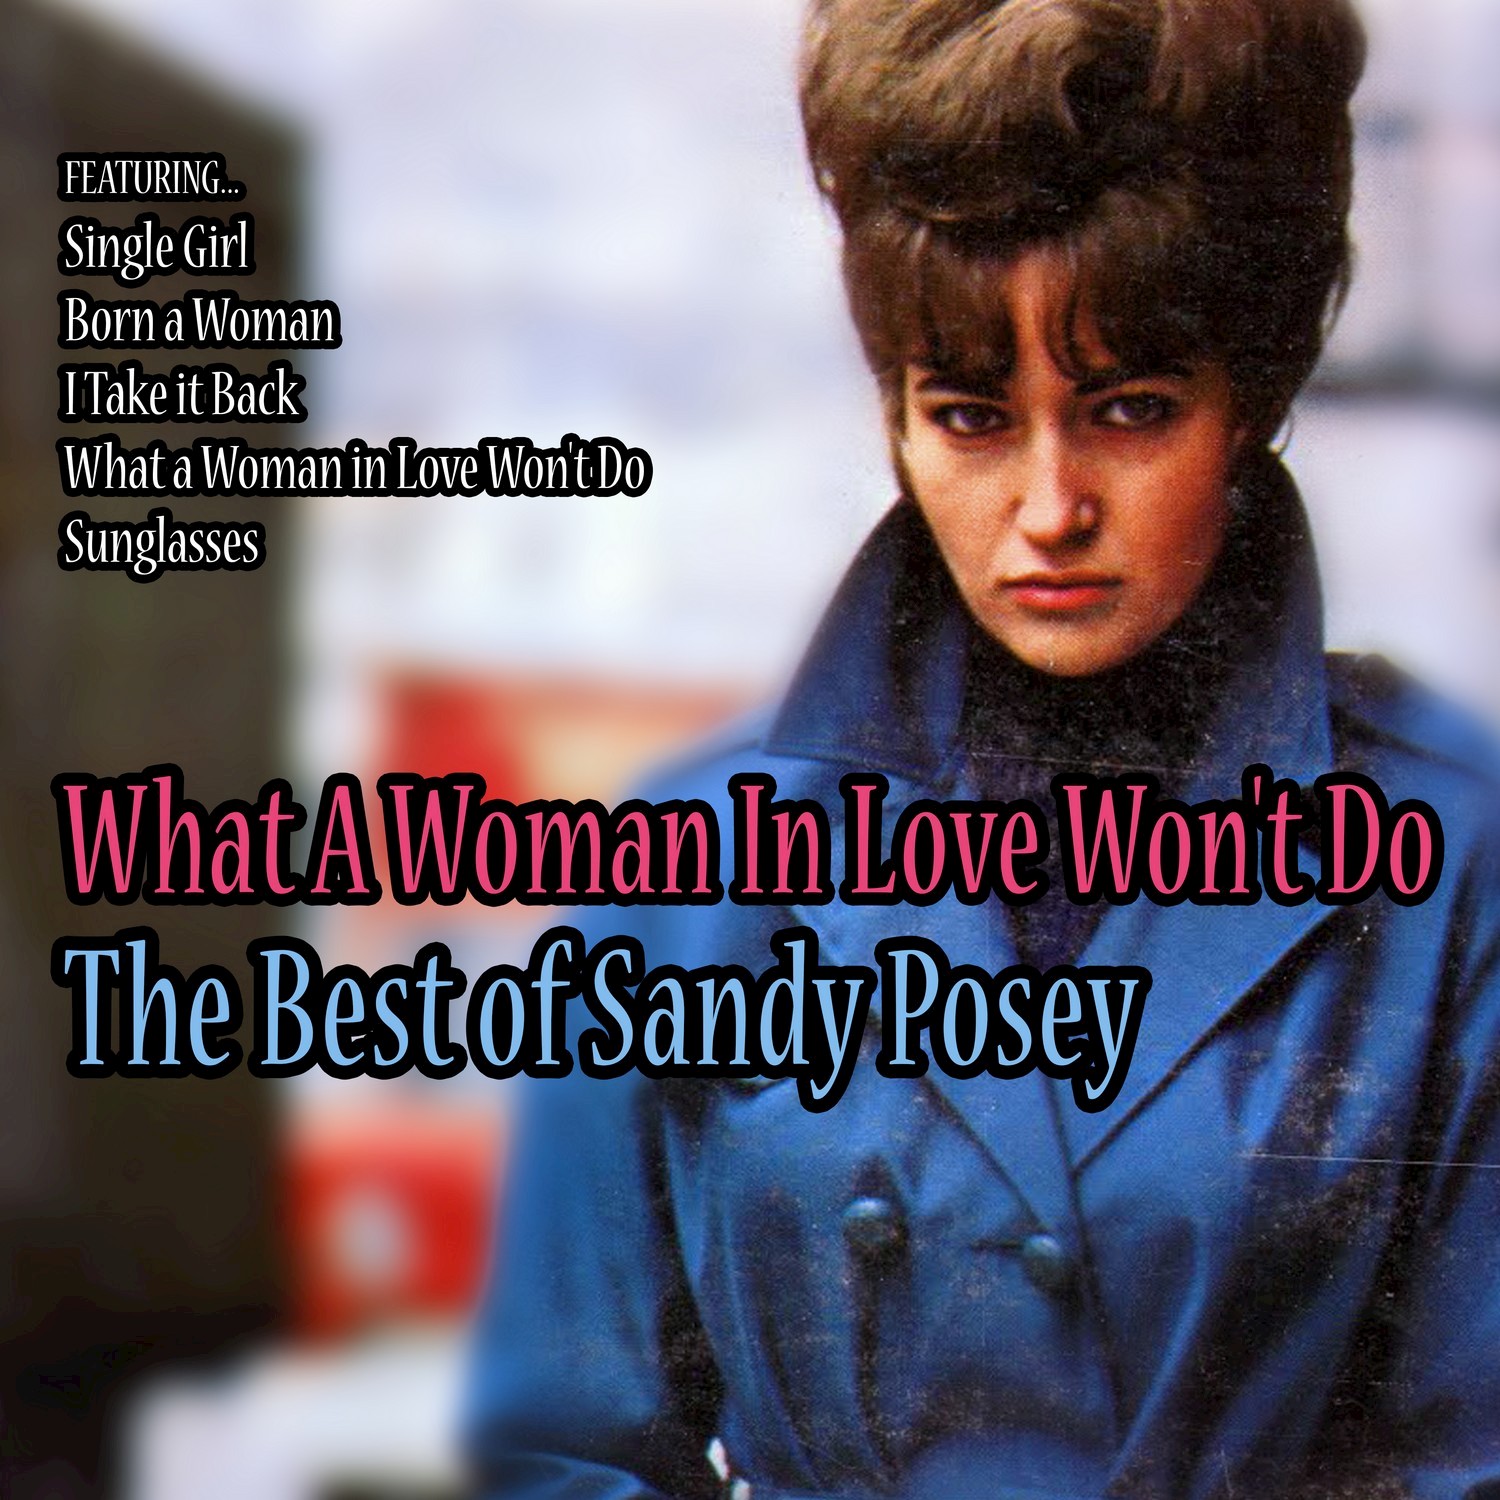 What a Woman in Love Won't Do: The Best of Sandy Posey